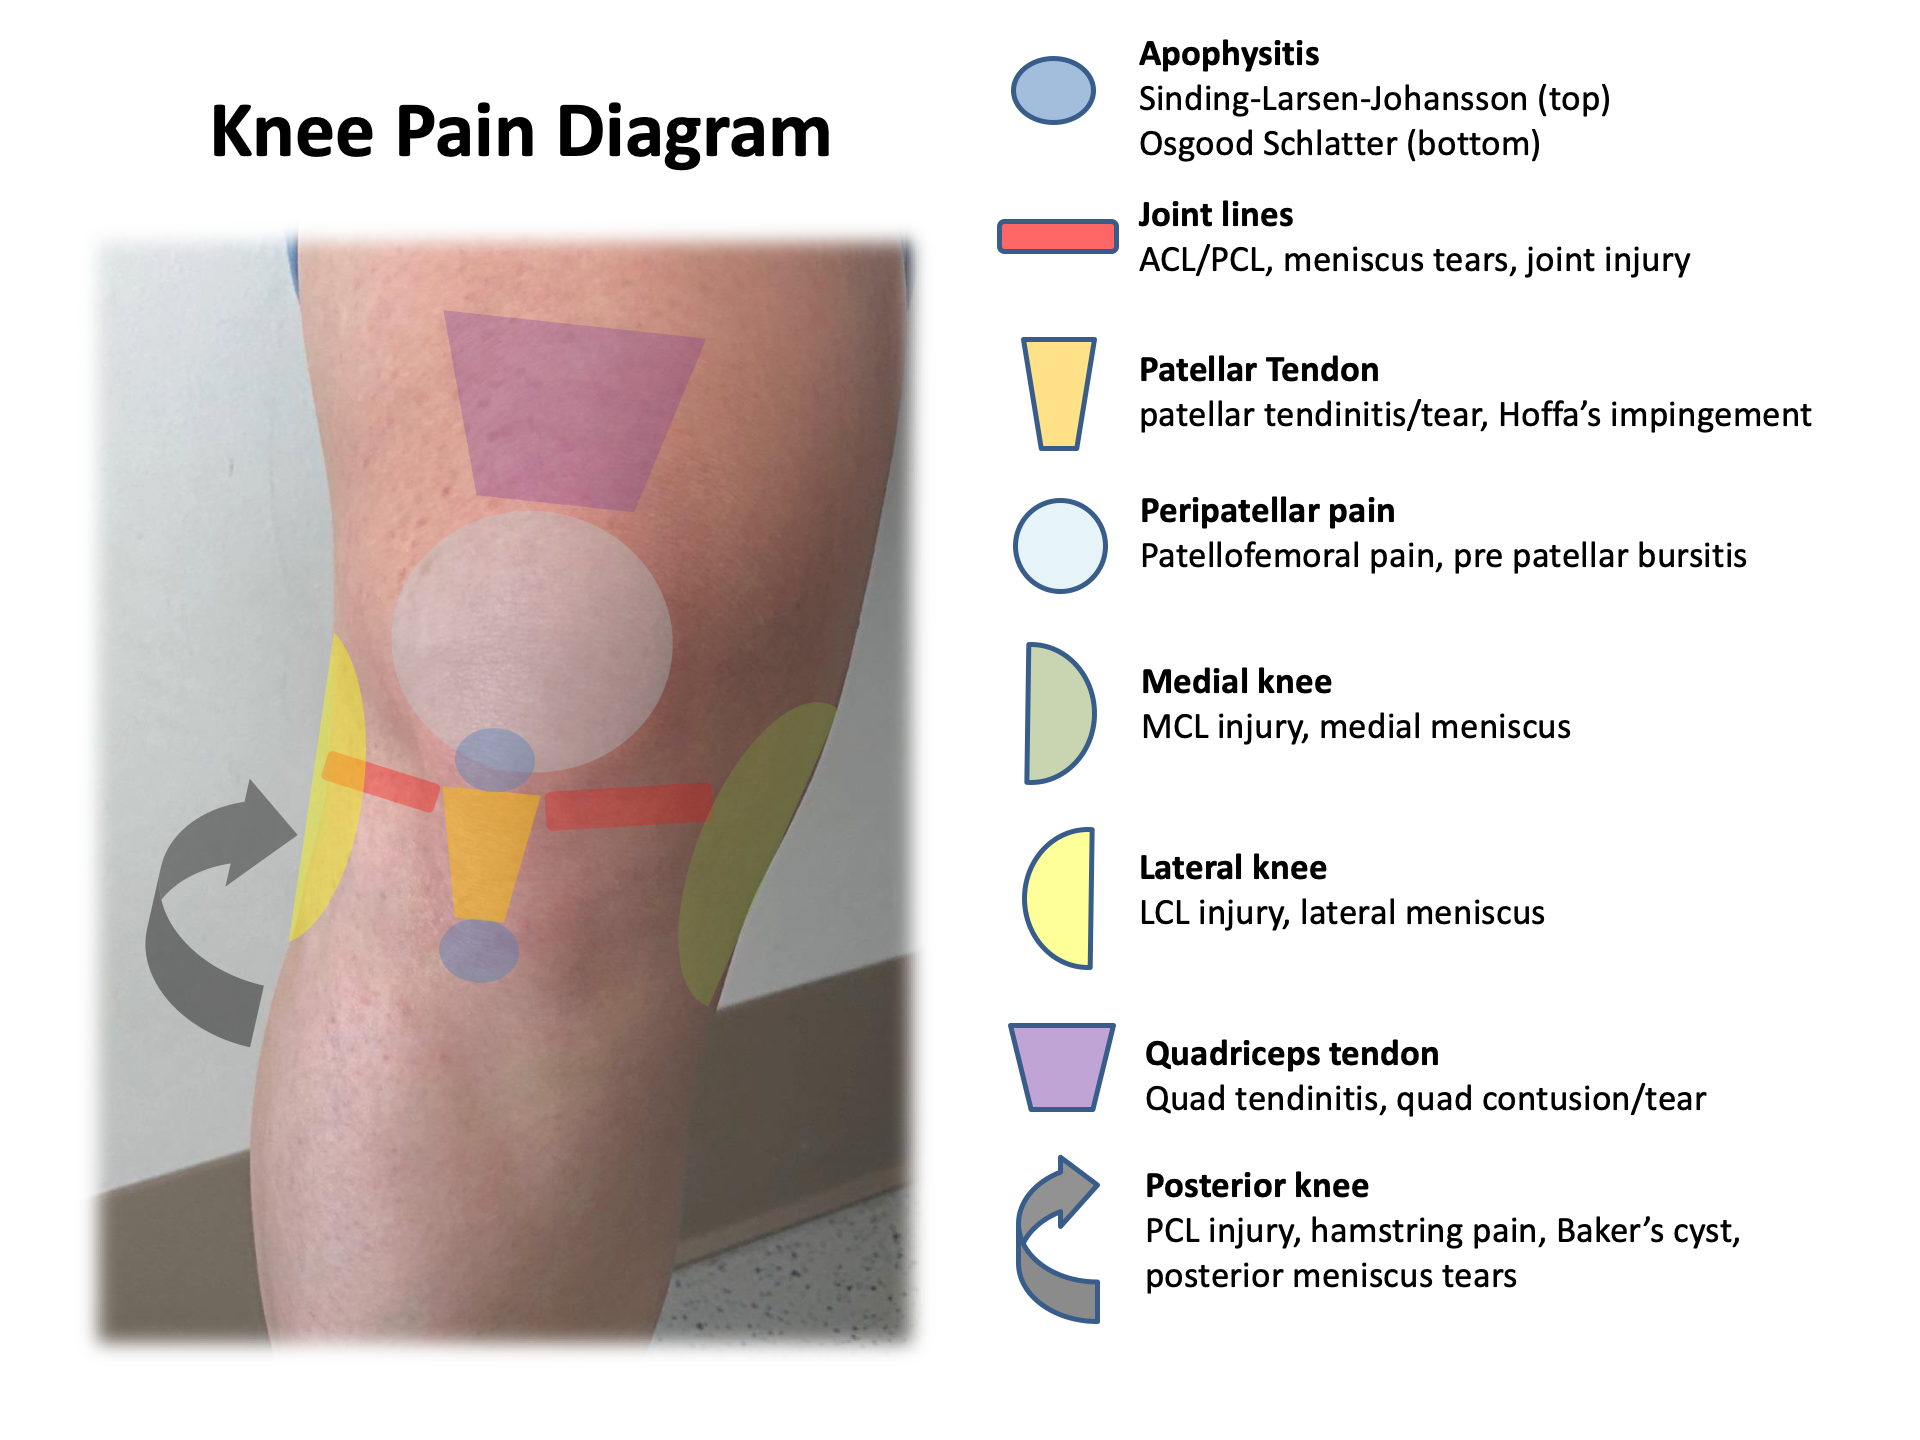 What is the best diagnostic tool for knee pain?